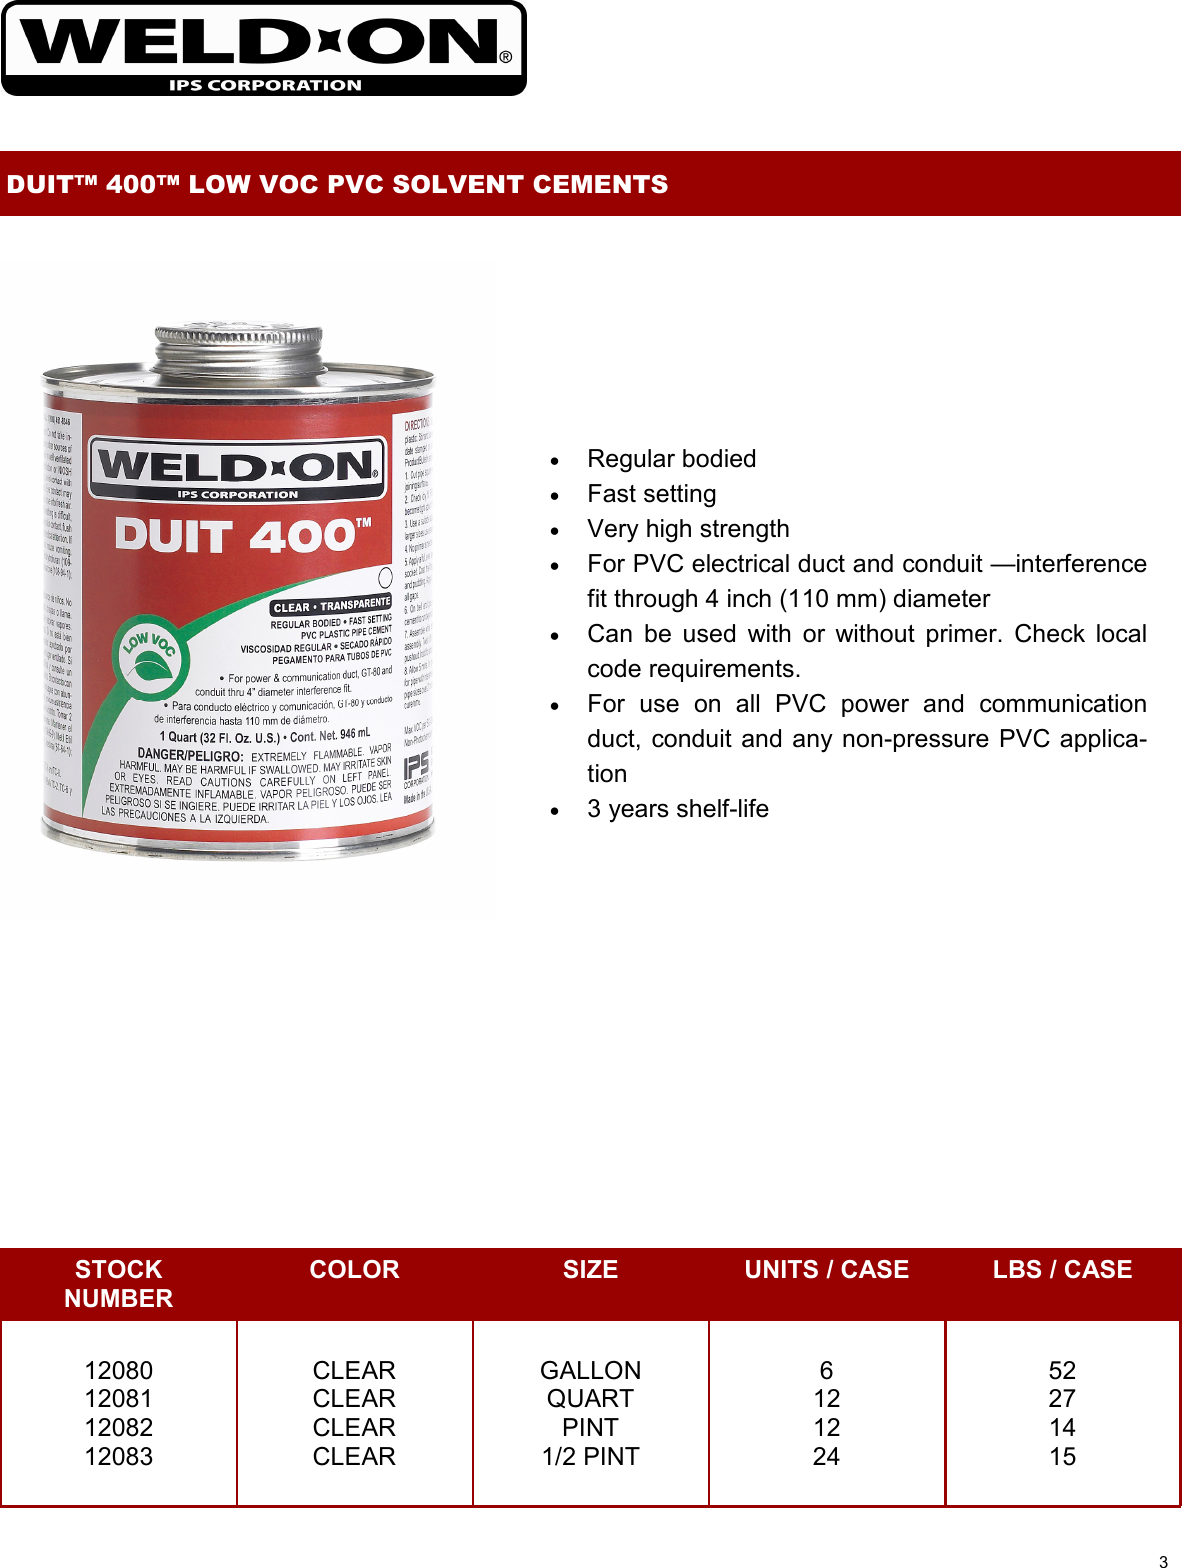 Page 4 of 12 - Duit Product Guide 09-2009